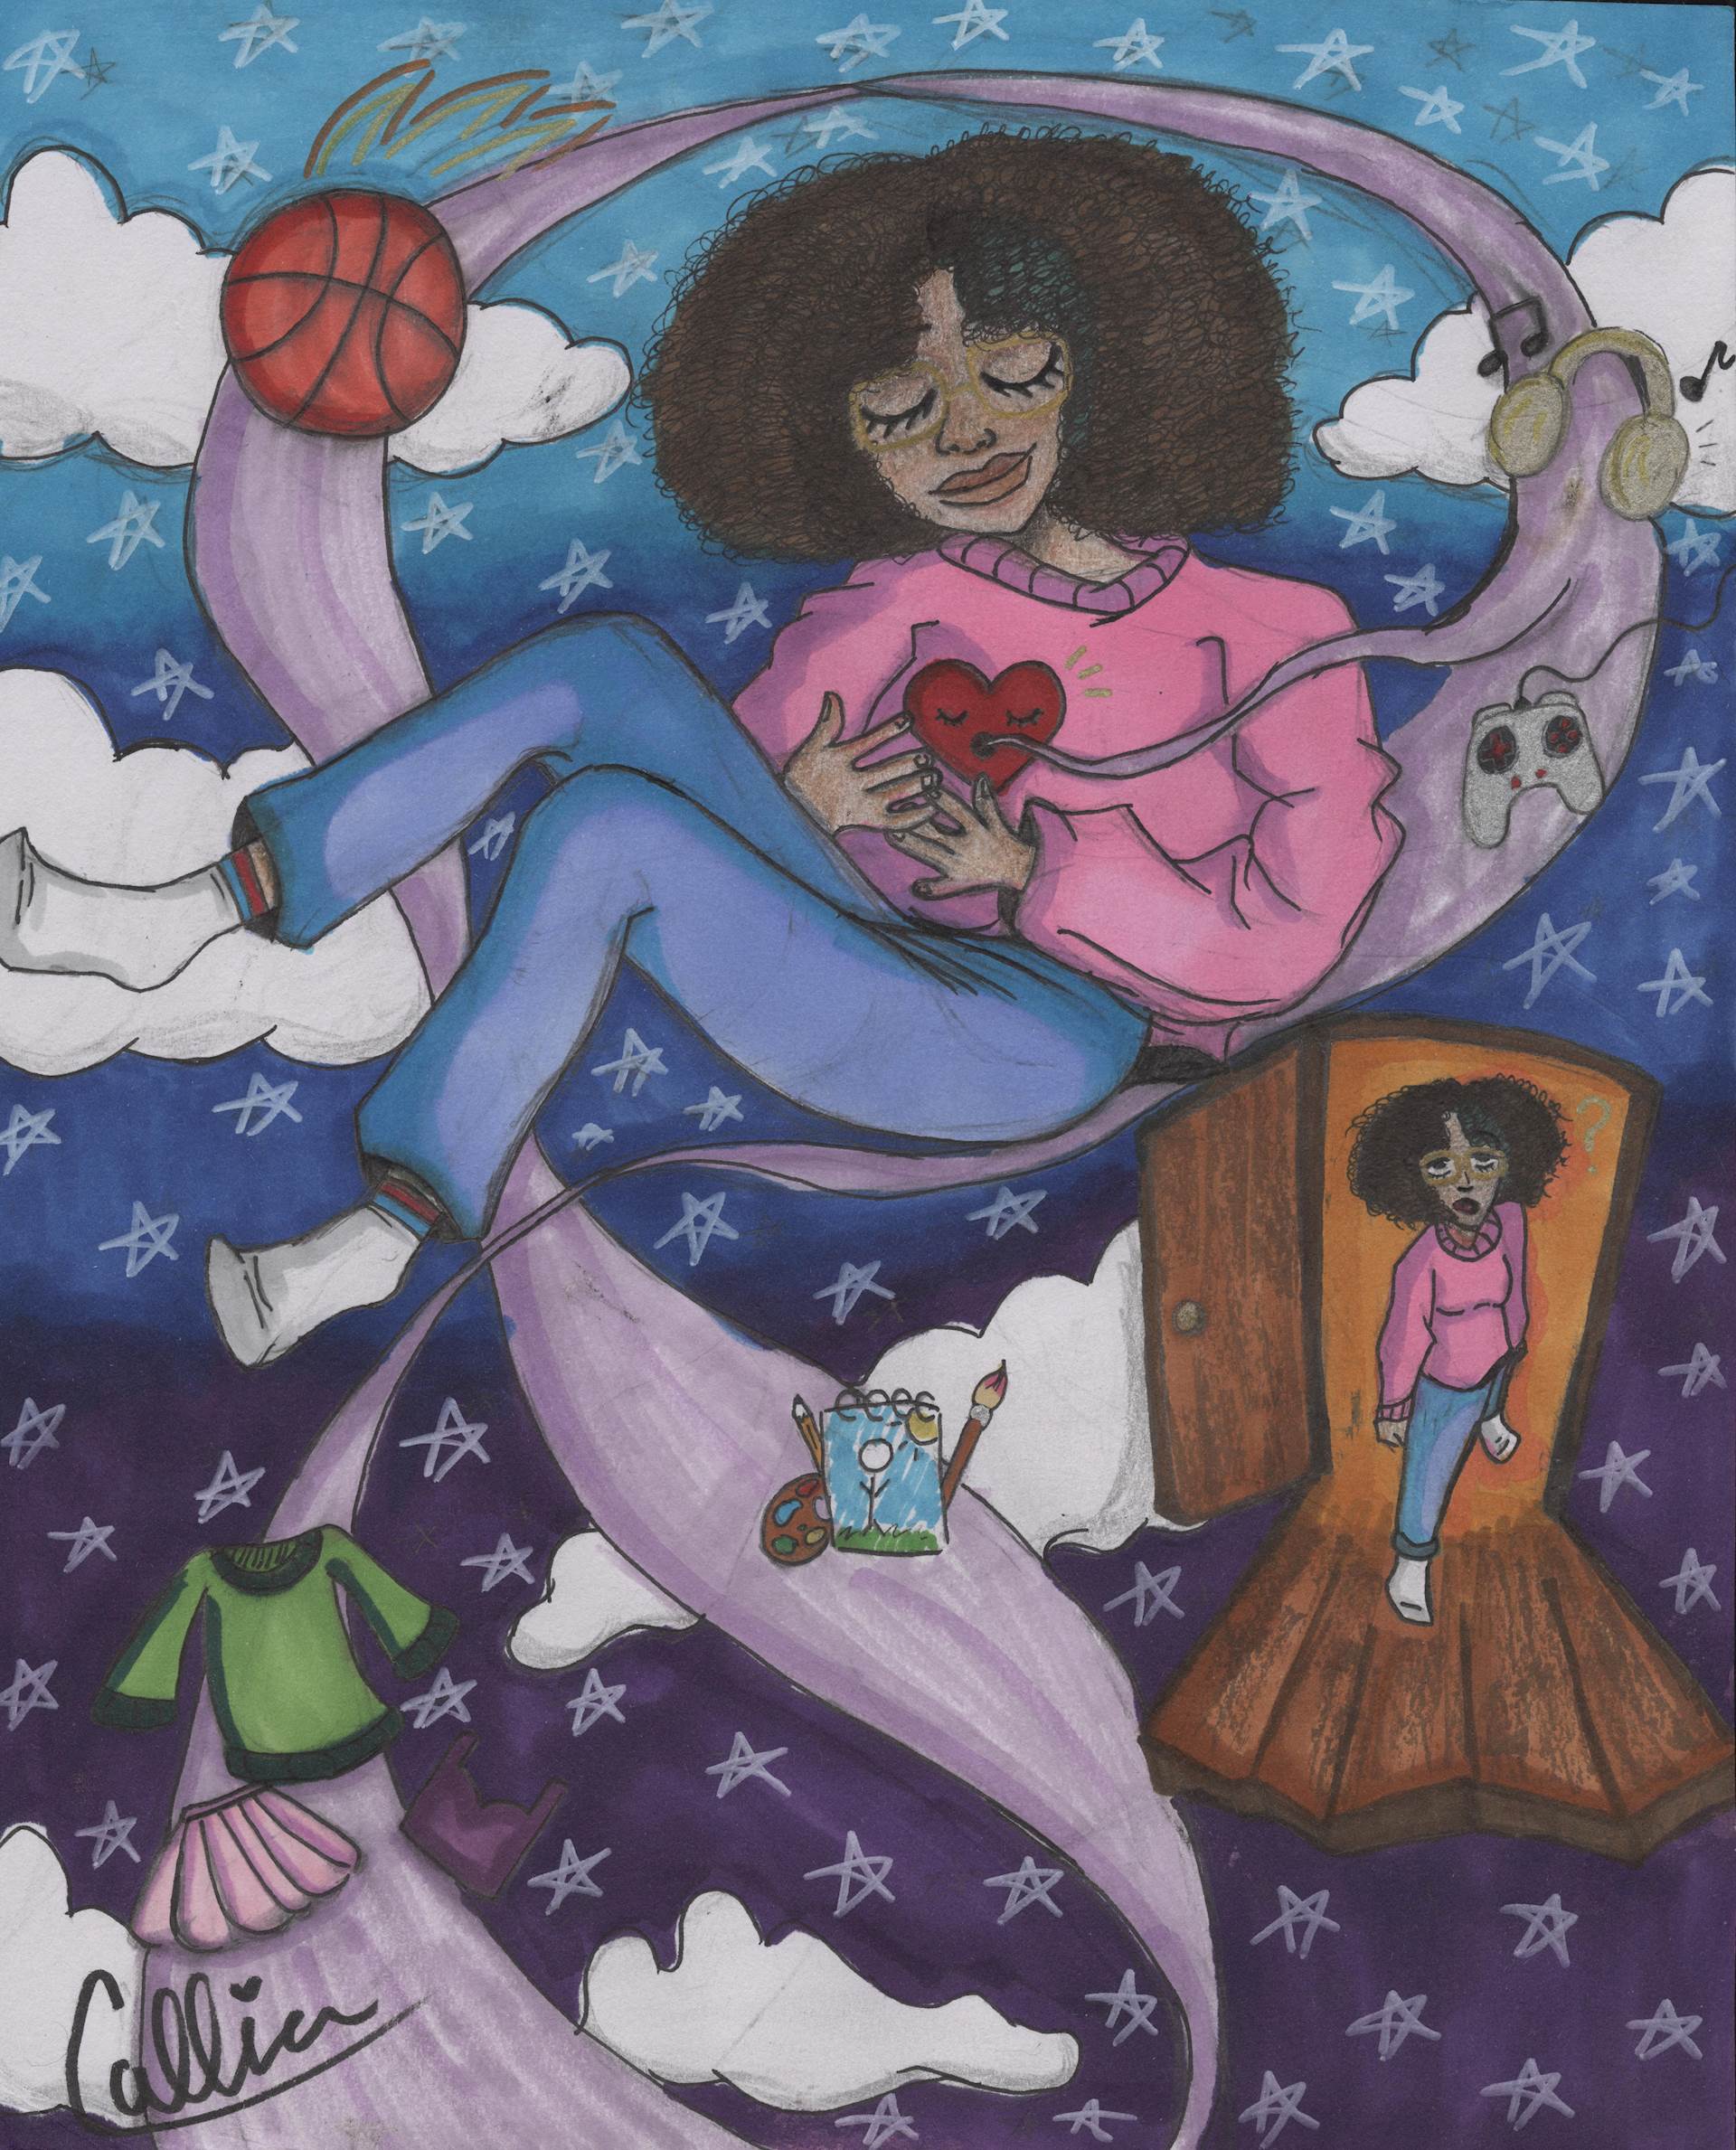 Drawing of a young woman floating in space with various objects and bright colors floating around her